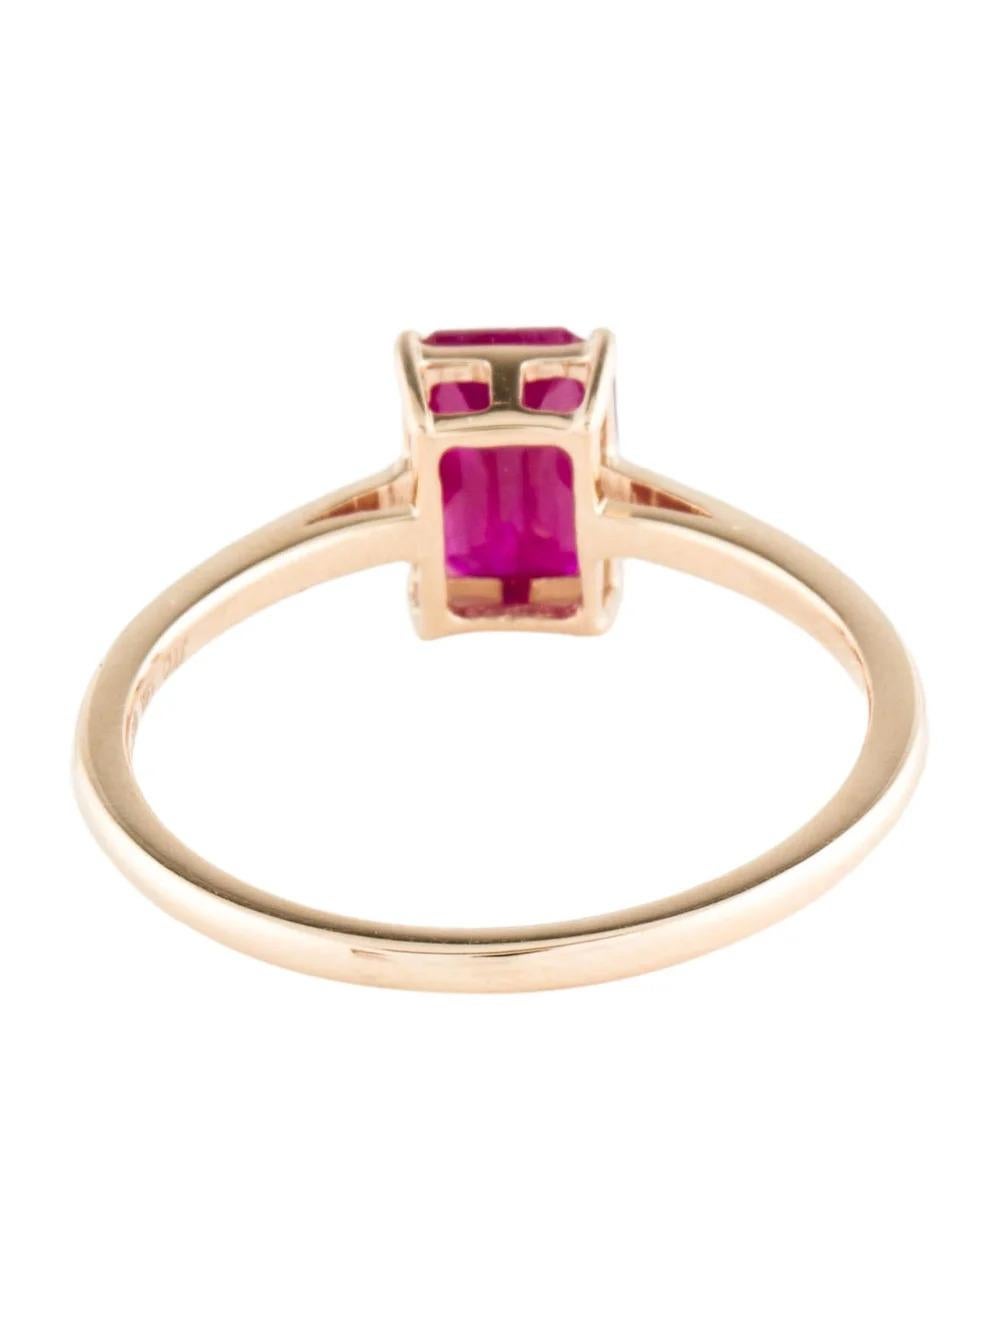 14K Ruby Cocktail Ring, Size 6.75: Elegant Red Gemstone in Yellow Gold Setting In New Condition For Sale In Holtsville, NY